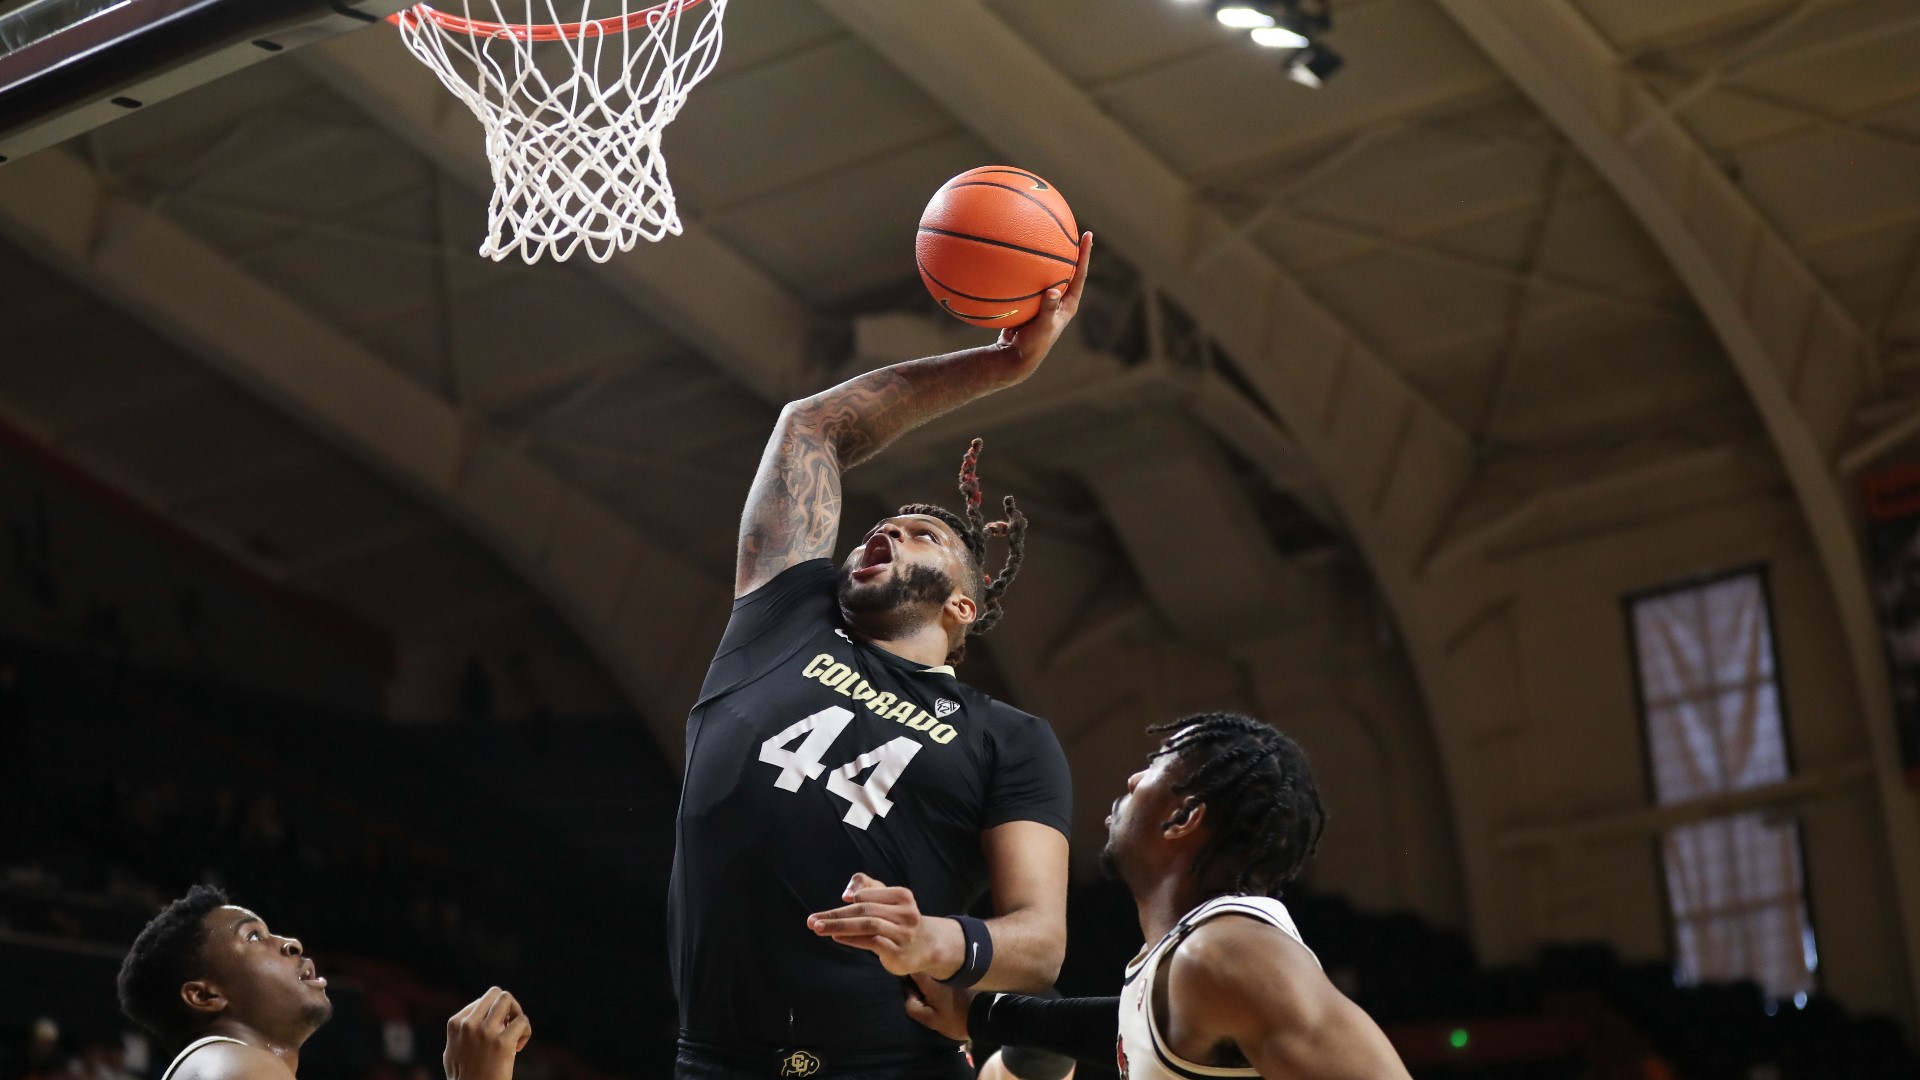 The Buffs big man honors his brother's memory with the way he plays, especially at the Big Dance.